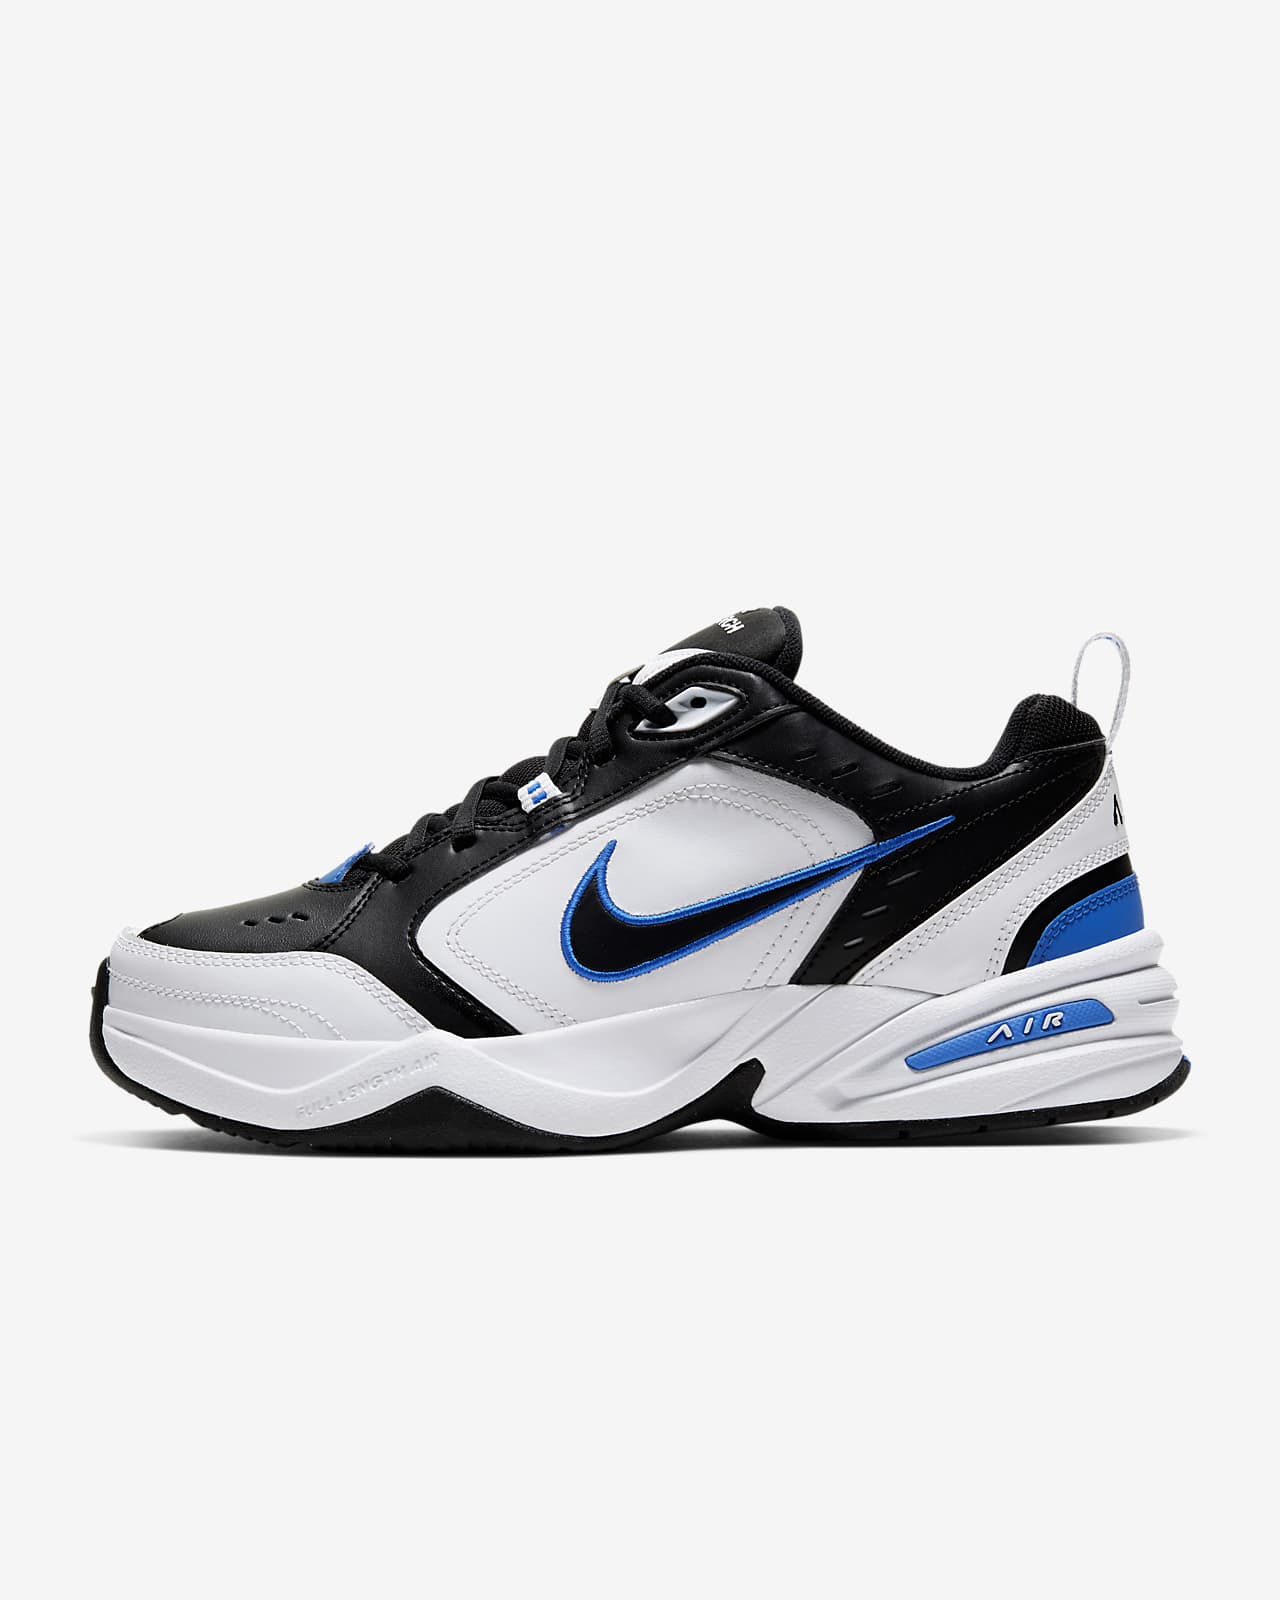 images of nike air